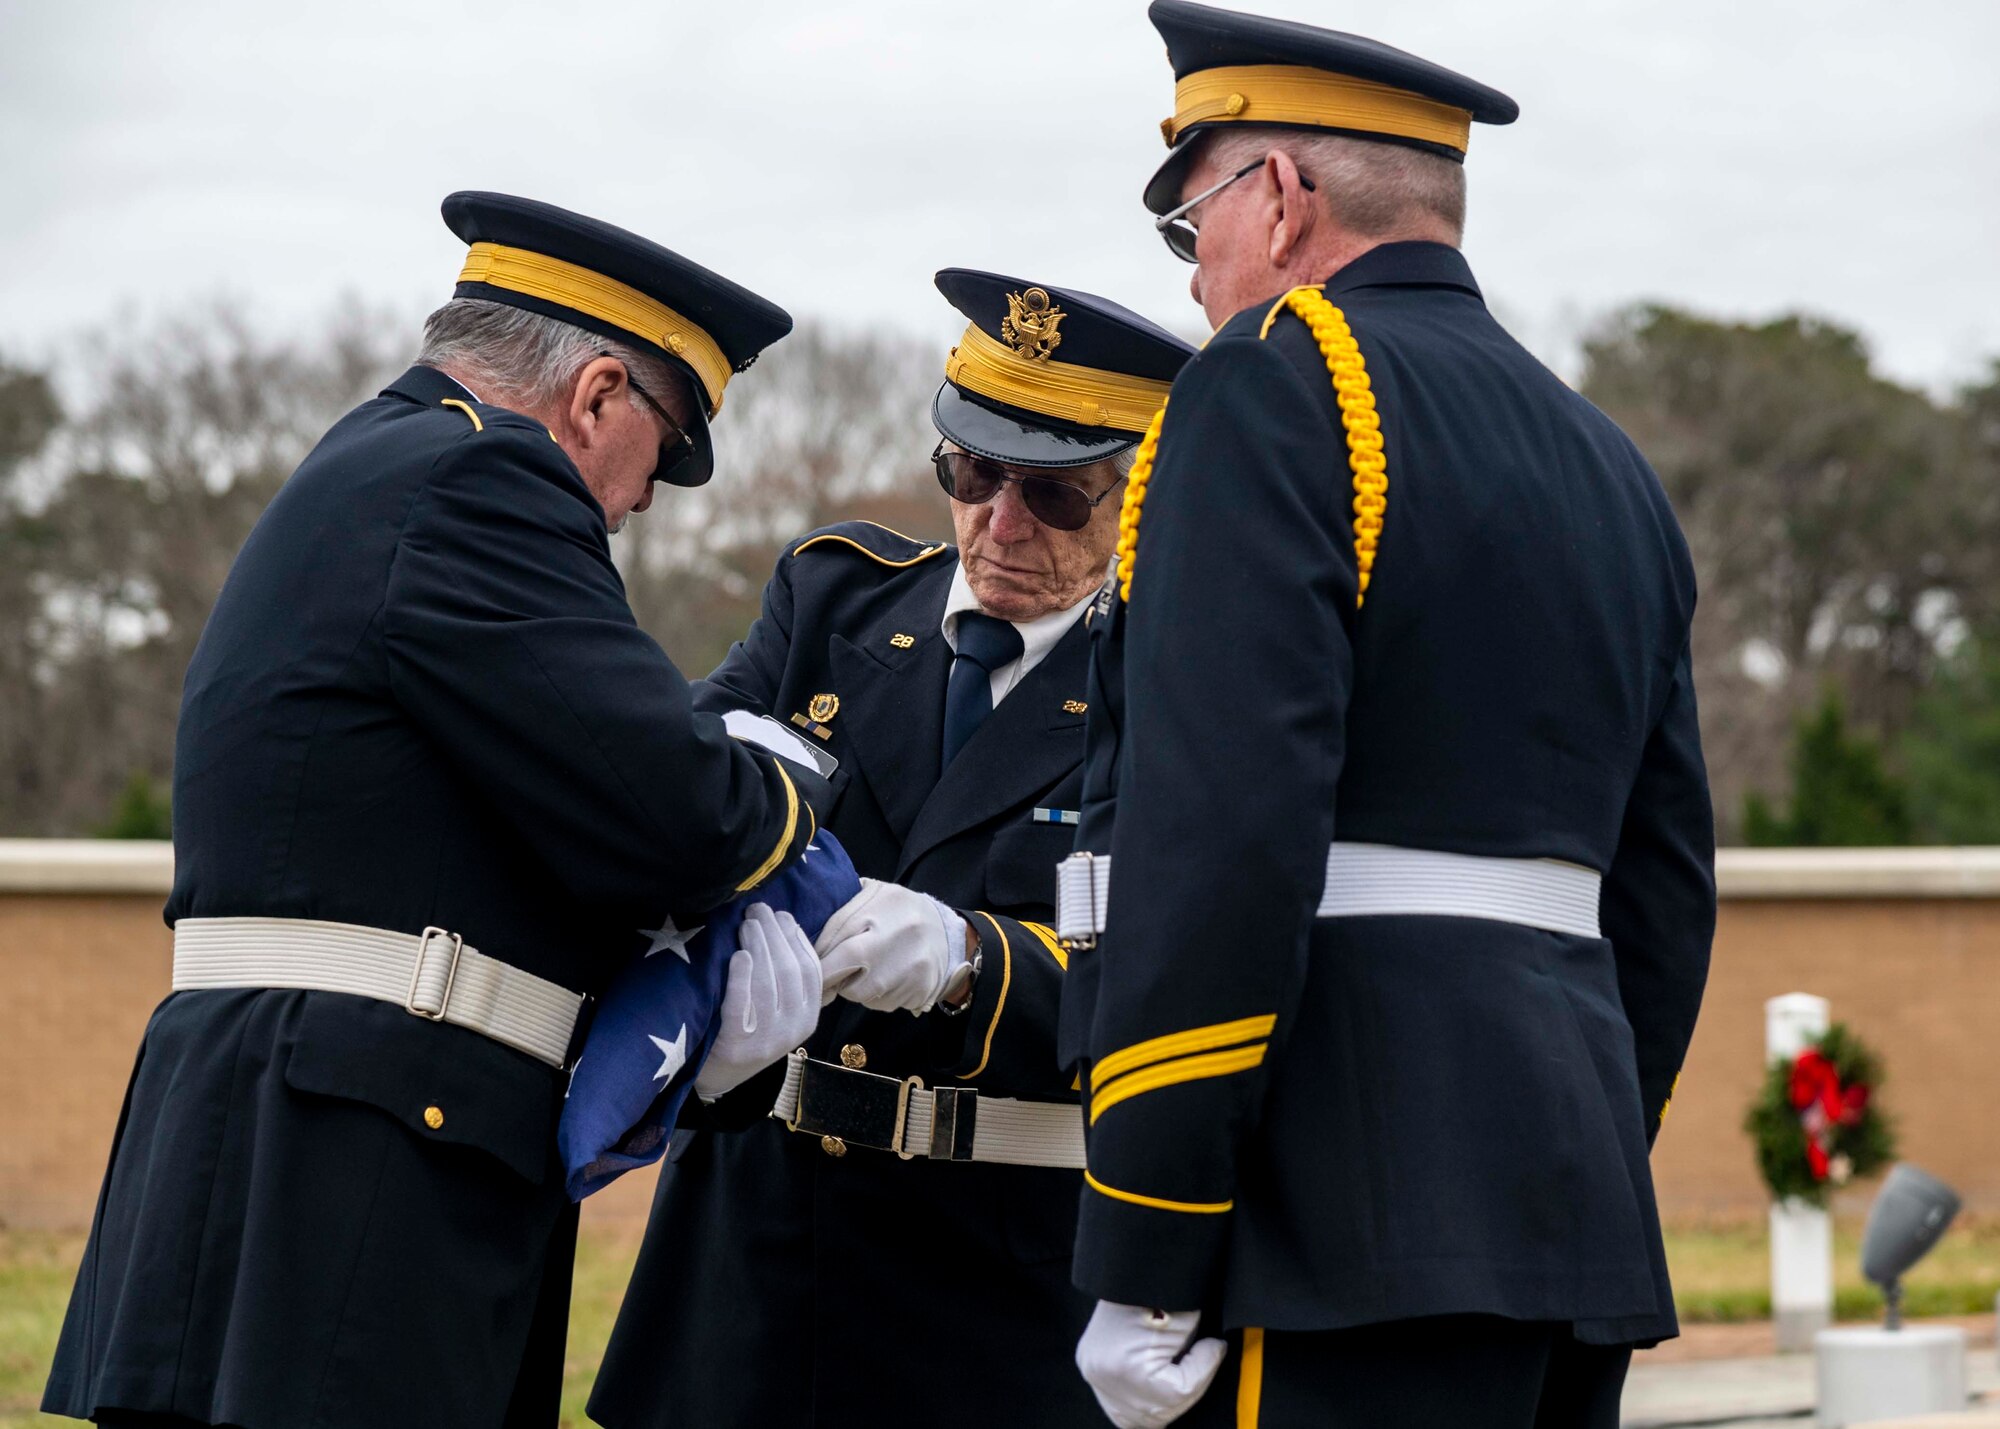 Members of an American Legion flag detail fold the U.S. flag during a wreath laying ceremony at the Delaware Veterans Memorial Cemetery in Millsboro, Delaware, Dec. 18, 2021. Each December, on National Wreaths Across America Day, wreath laying ceremonies are held across the country at more than 2,100 cemeteries, honoring veterans and those who have fallen. (U.S. Air Force photo by Senior Airman Stephani Barge)